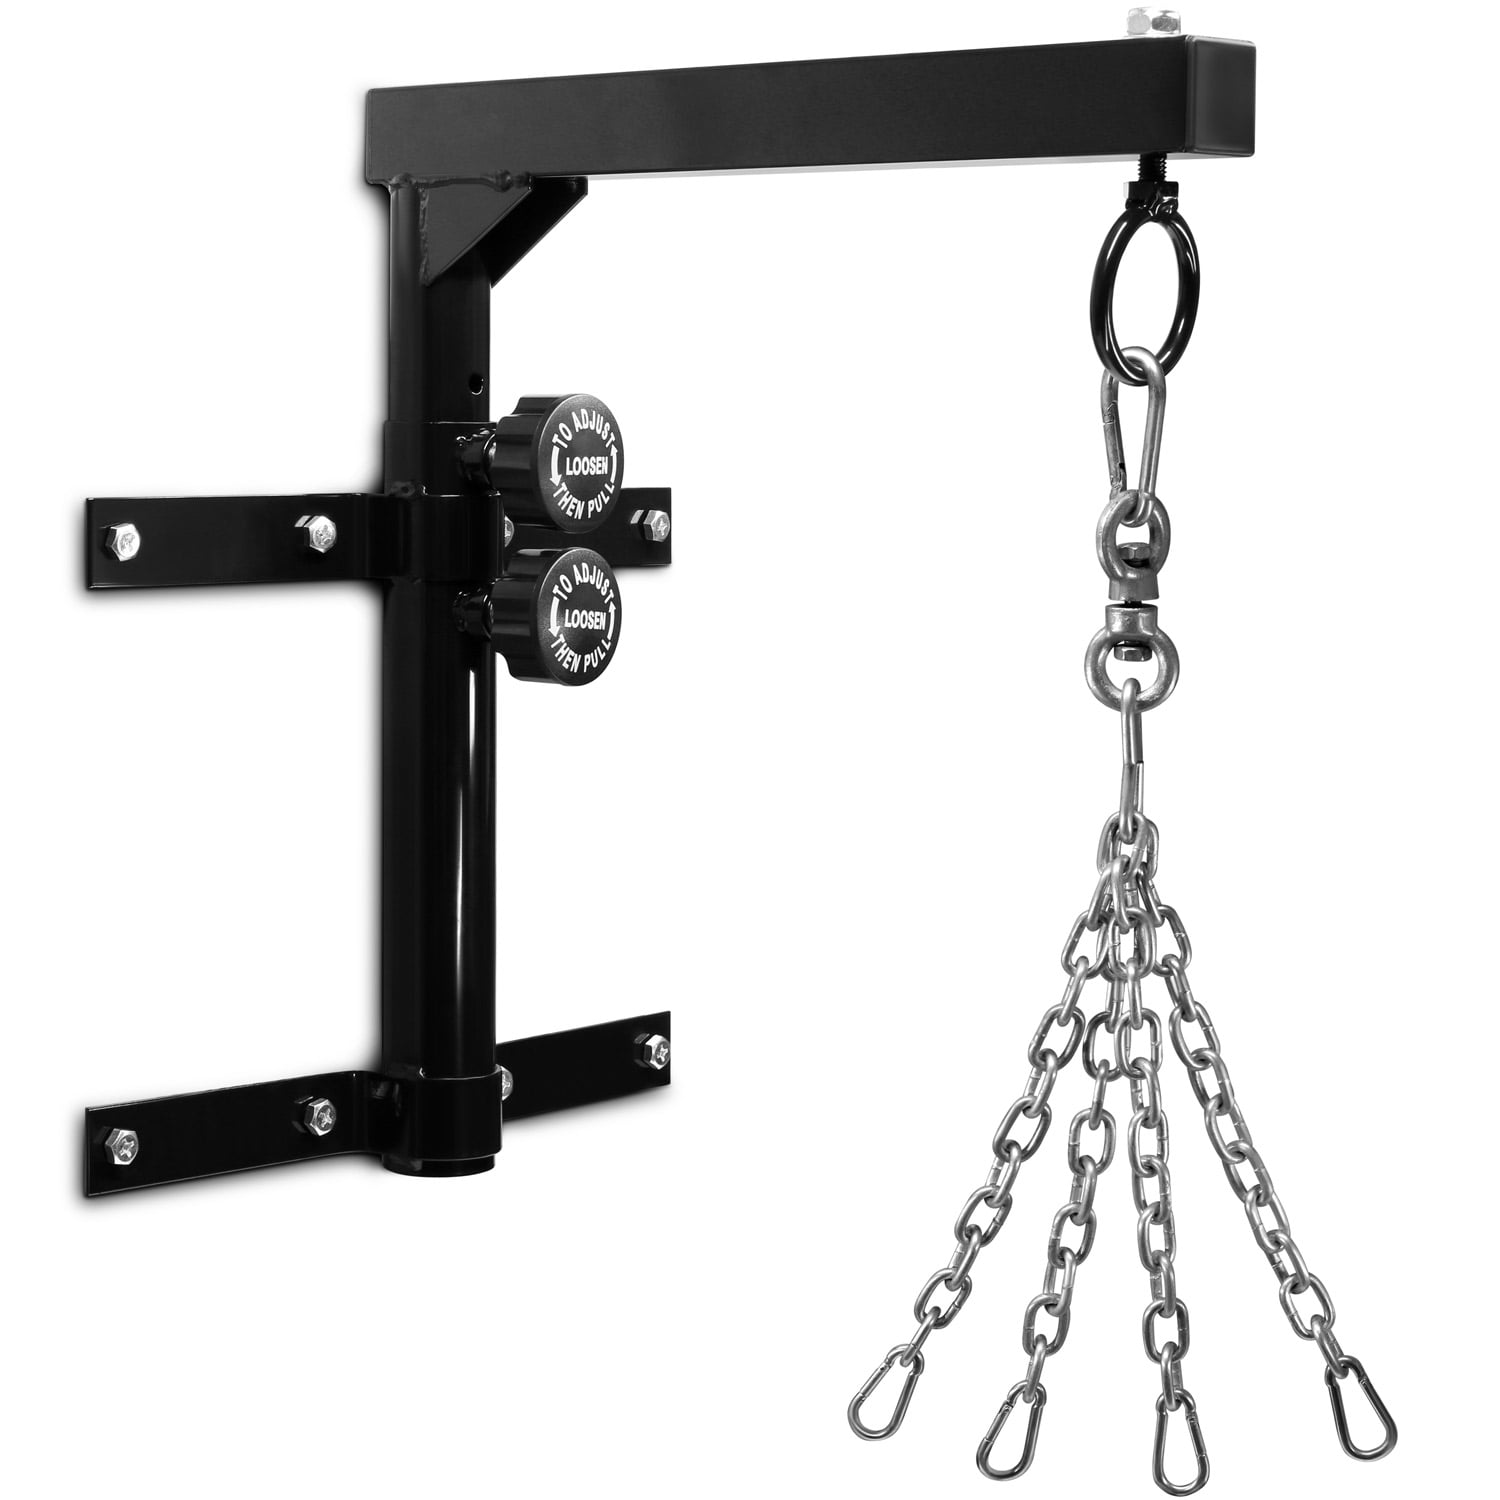 Heavy Boxing Bag Duty Punching Chains Training Us Chain Hanging Swivel up 150lbs 